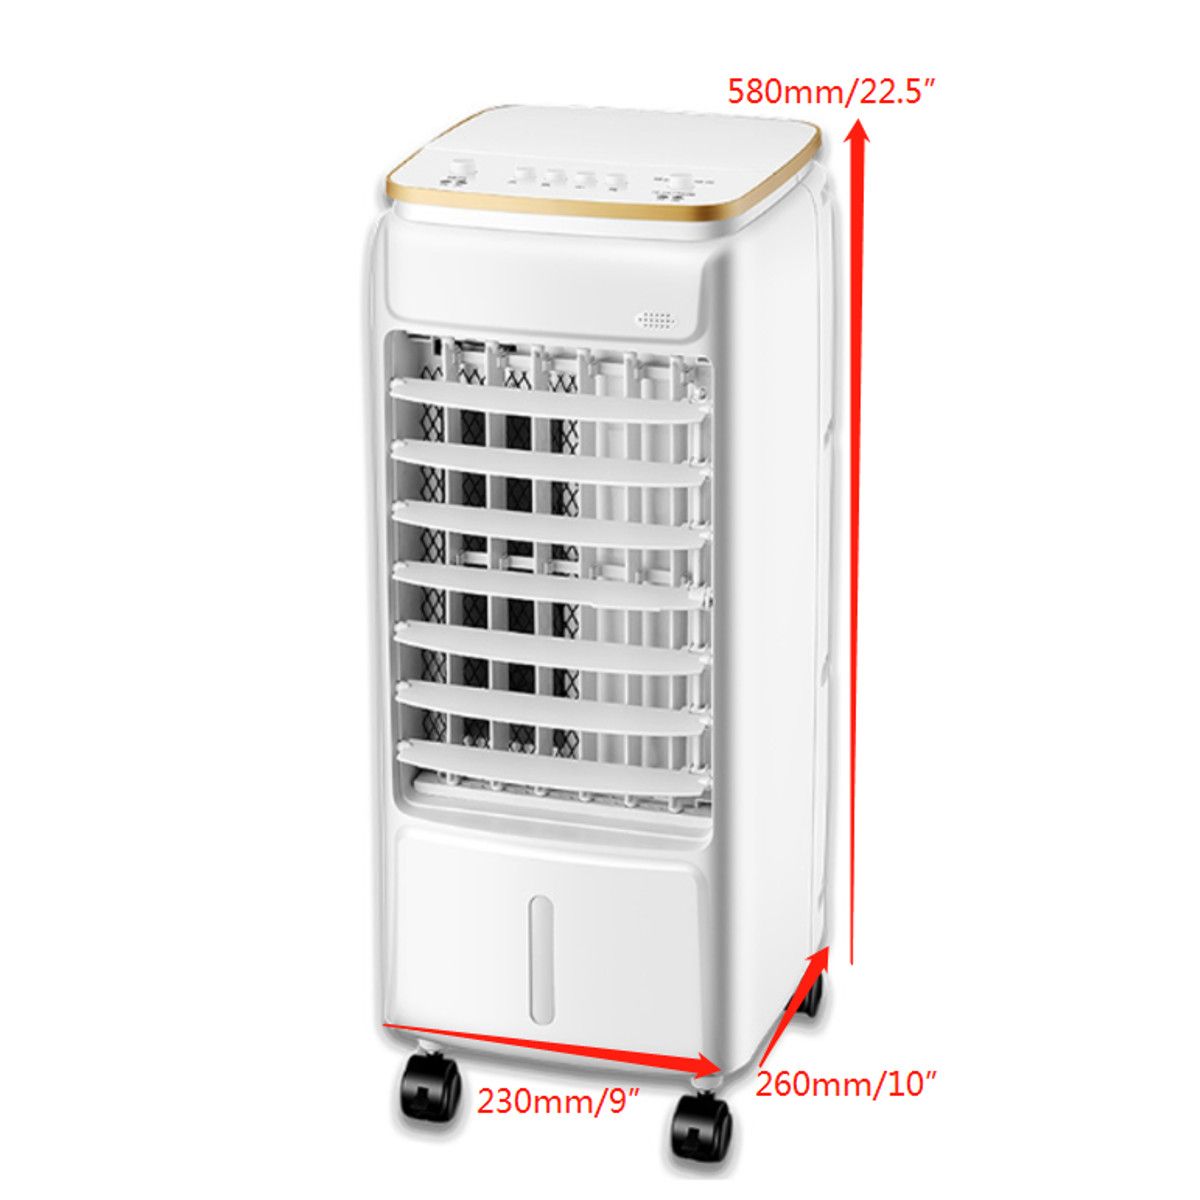 3-Gear-Portable-Movable-Air-Conditioning-Cooler-Fan-Units-Humidifier-Home-Office-1534232